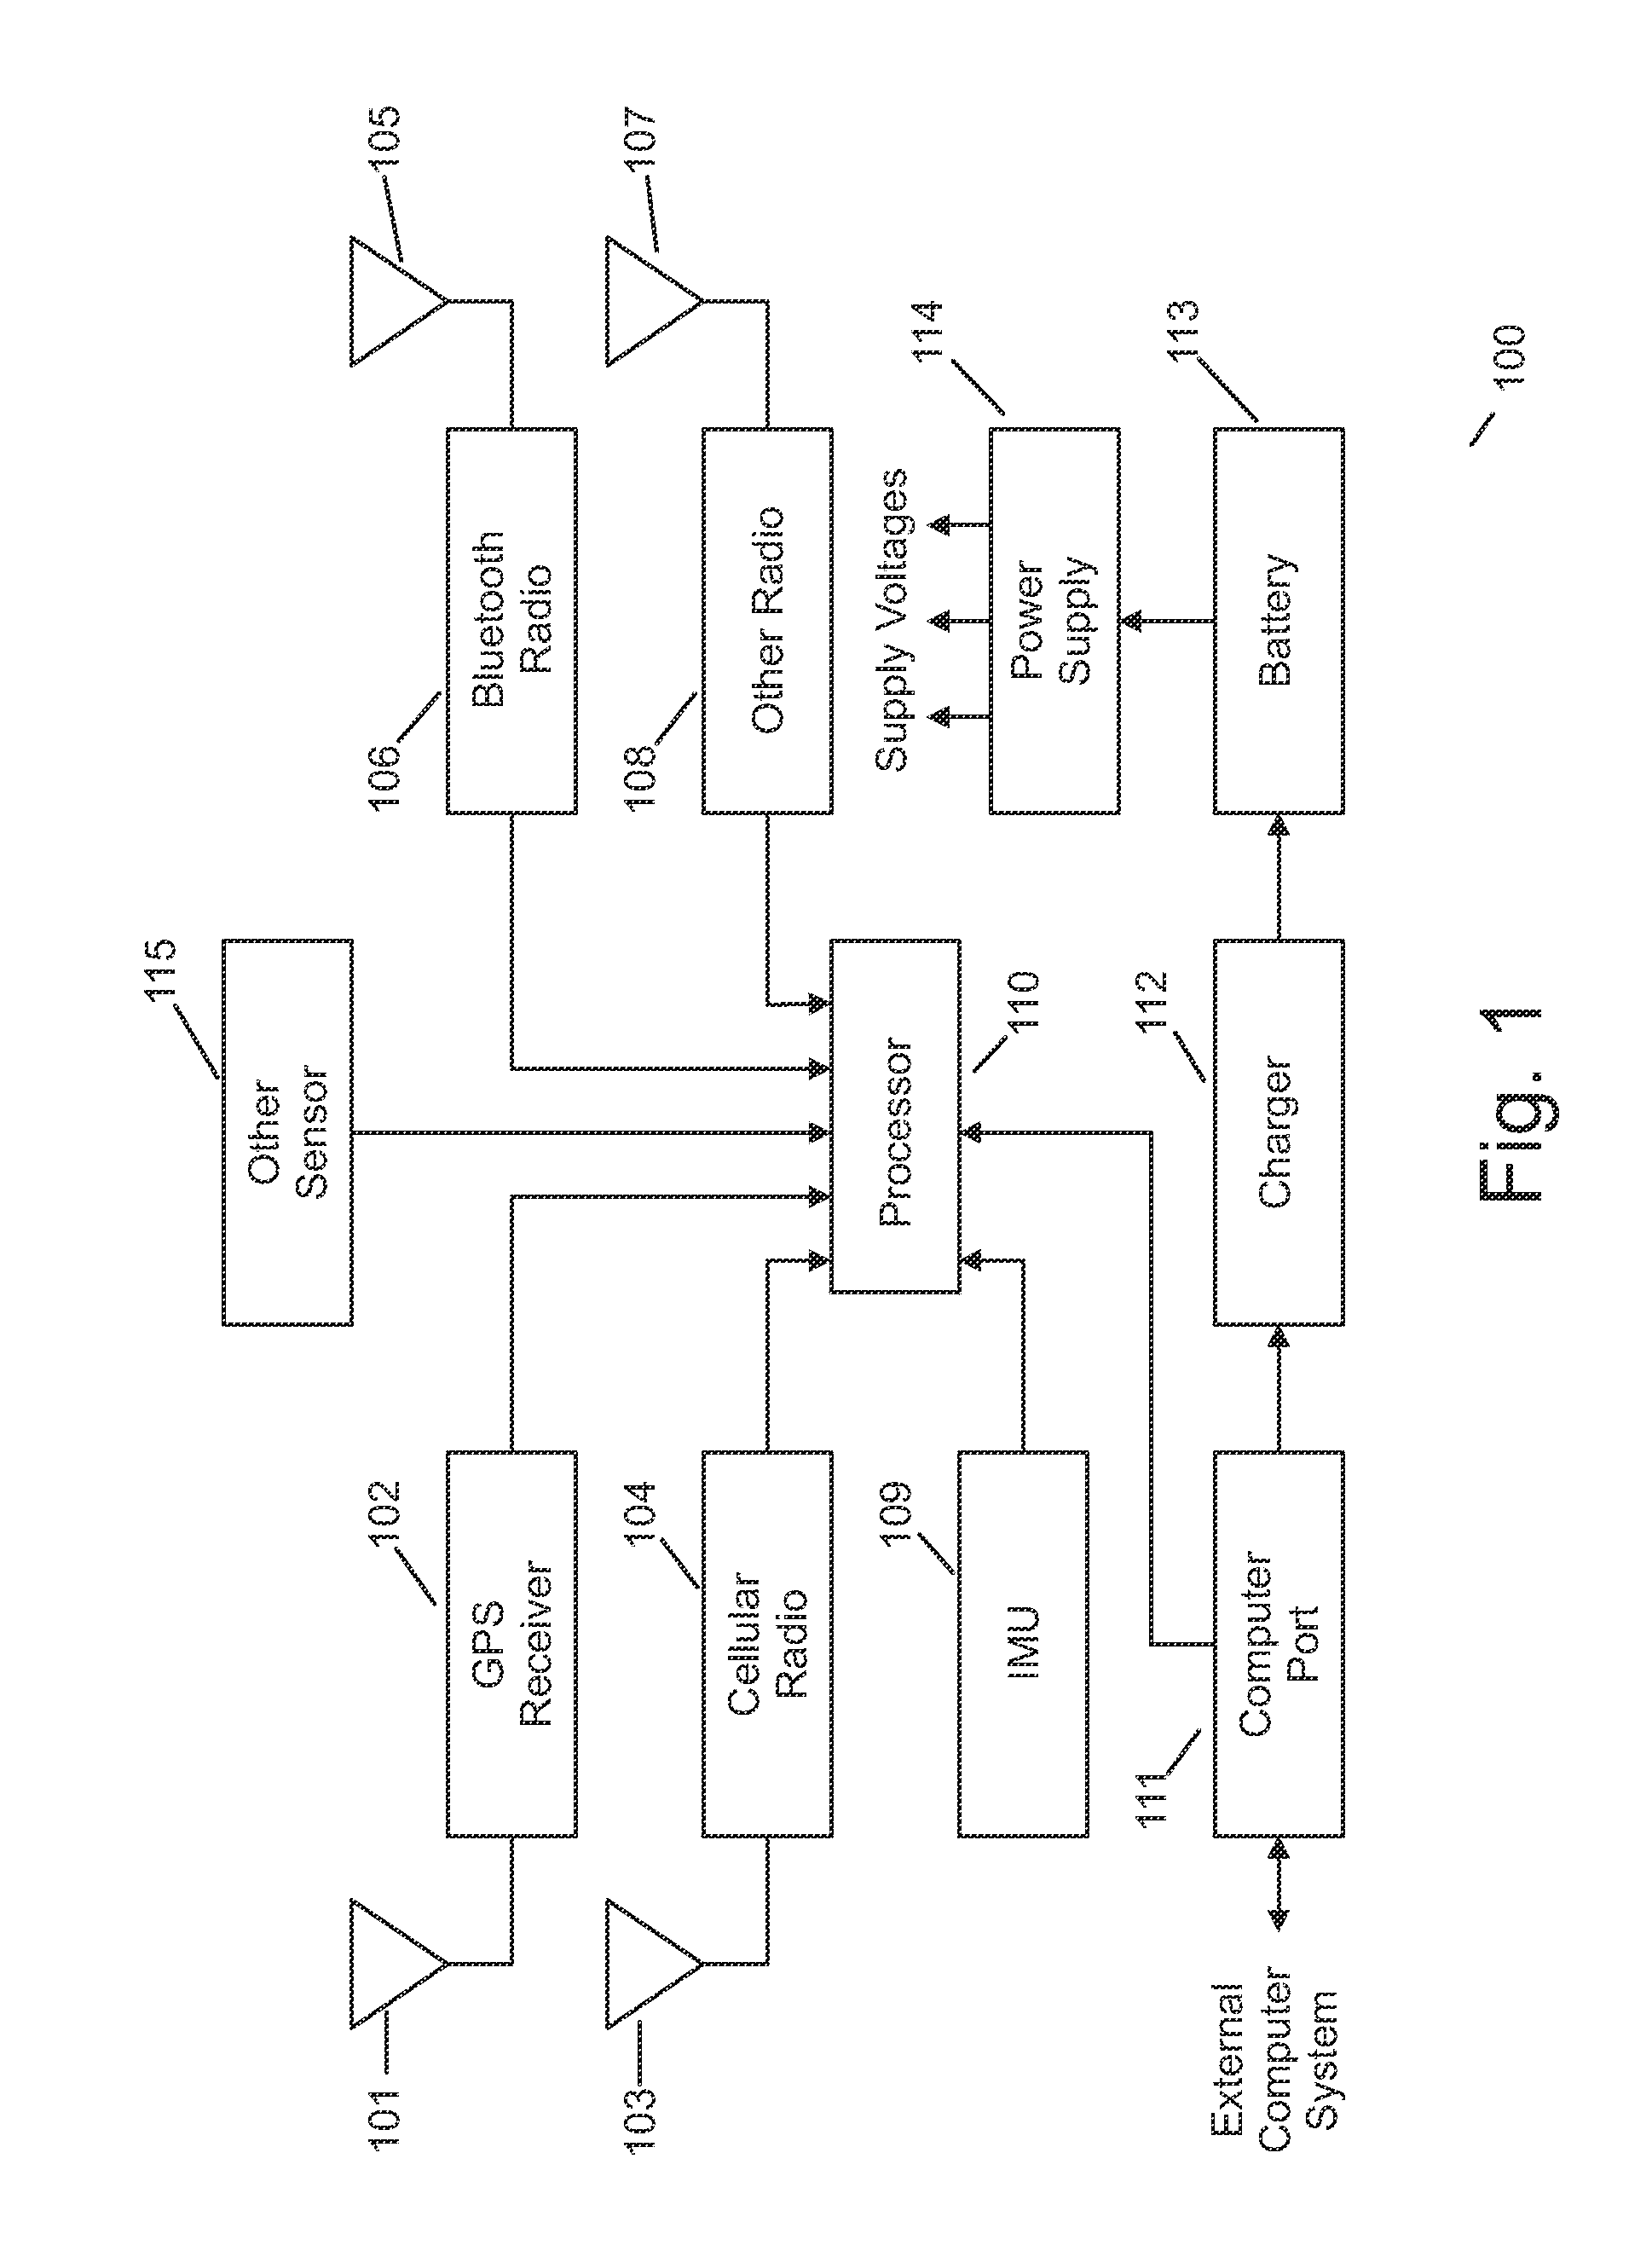 Tracking device and remote monitoring system